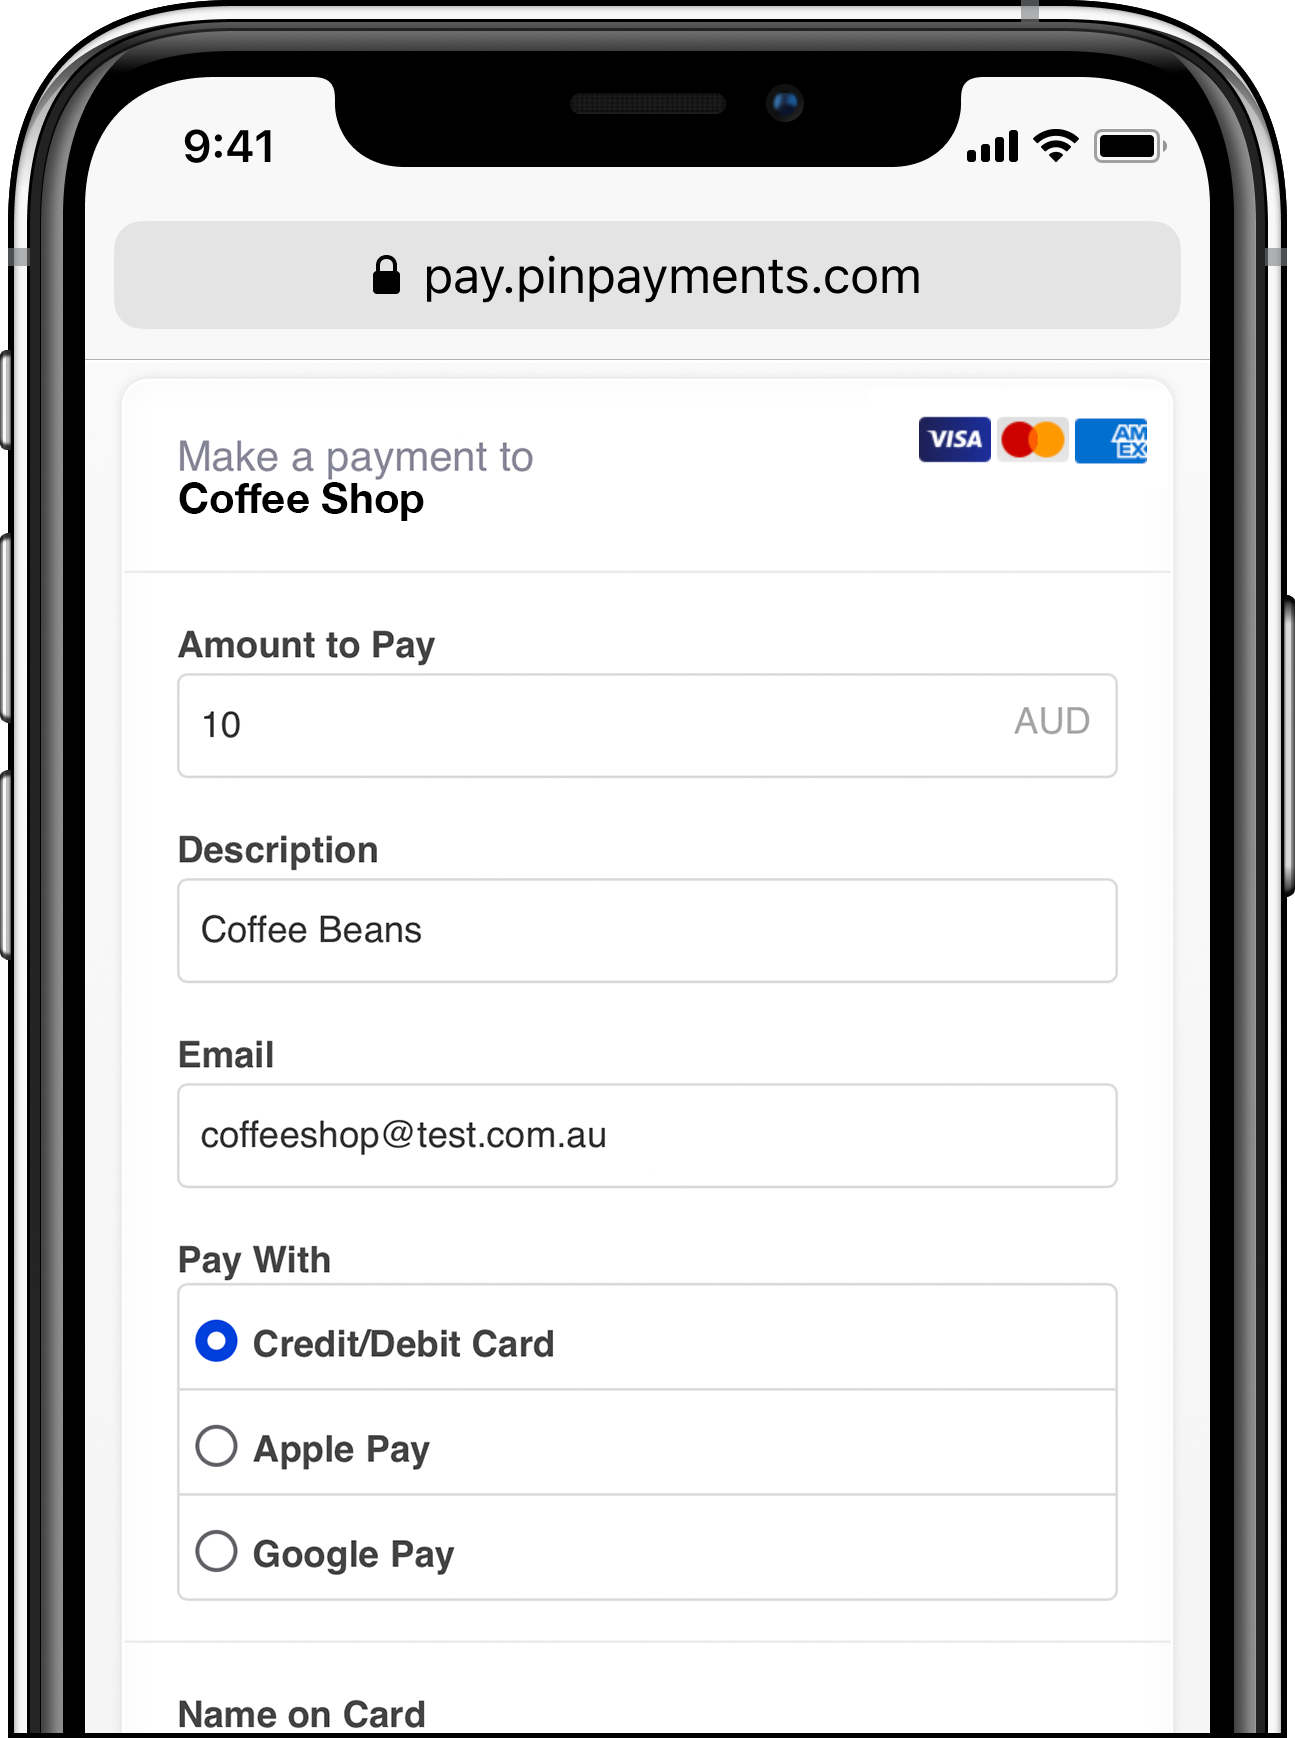 Payment page showing the option to pay with a credit or debit card, Apple Pay or Google Pay.